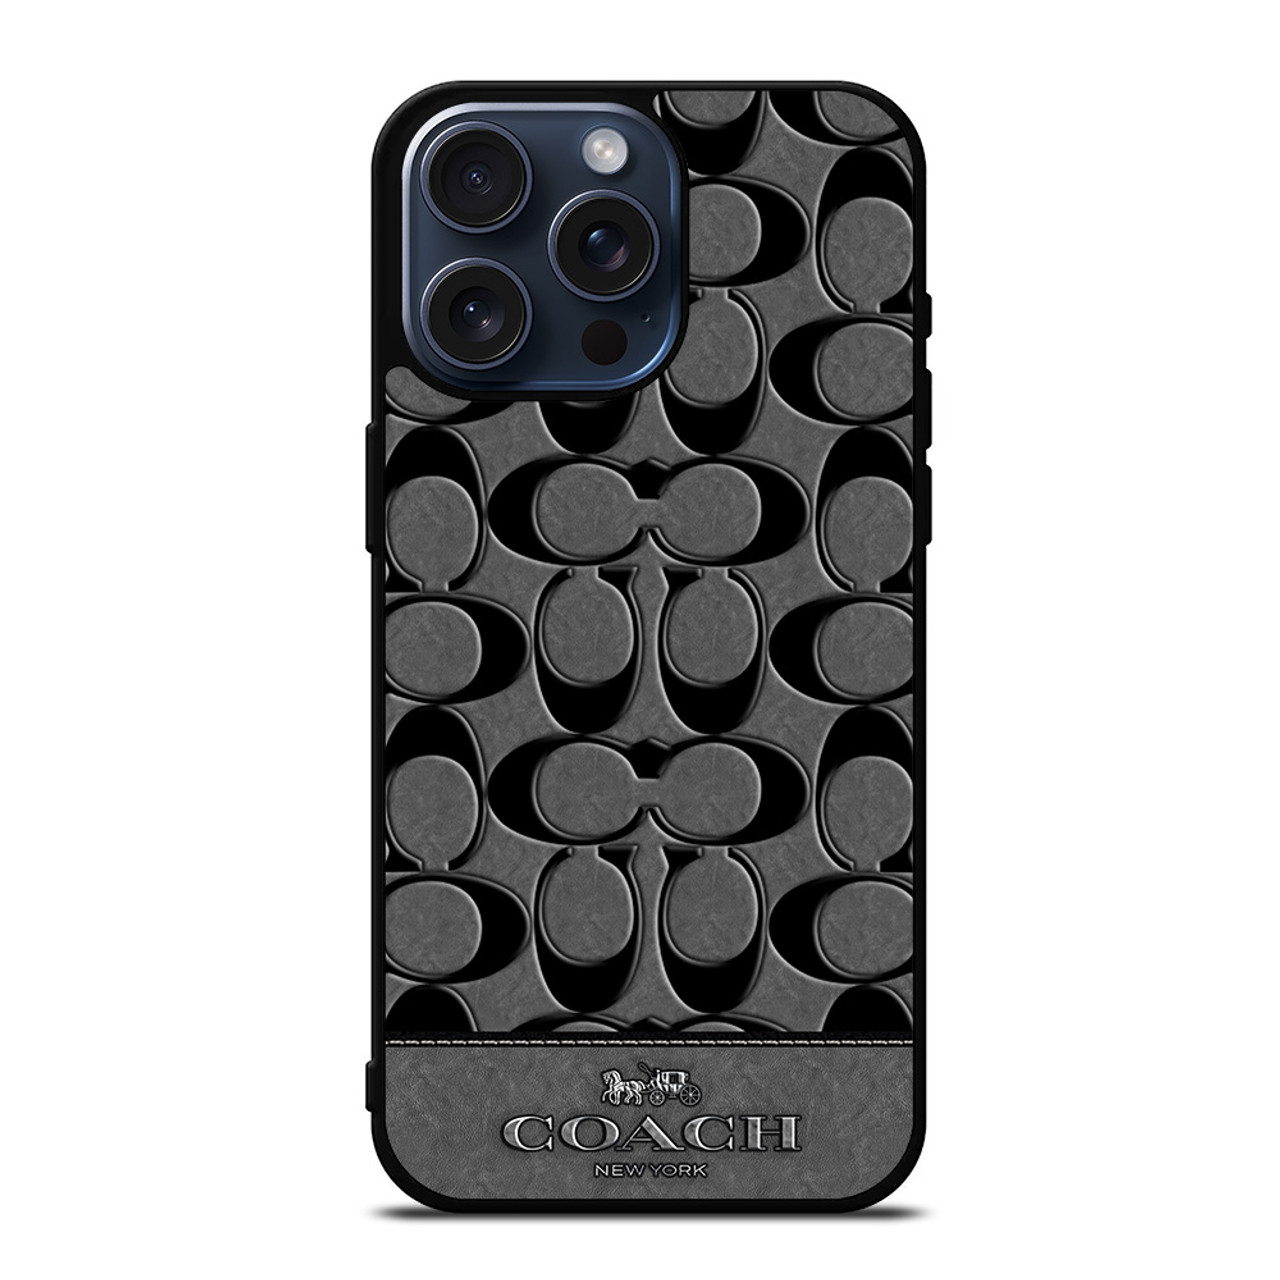 COACH NEW YORK GREY iPhone 15 Pro Max Case Cover